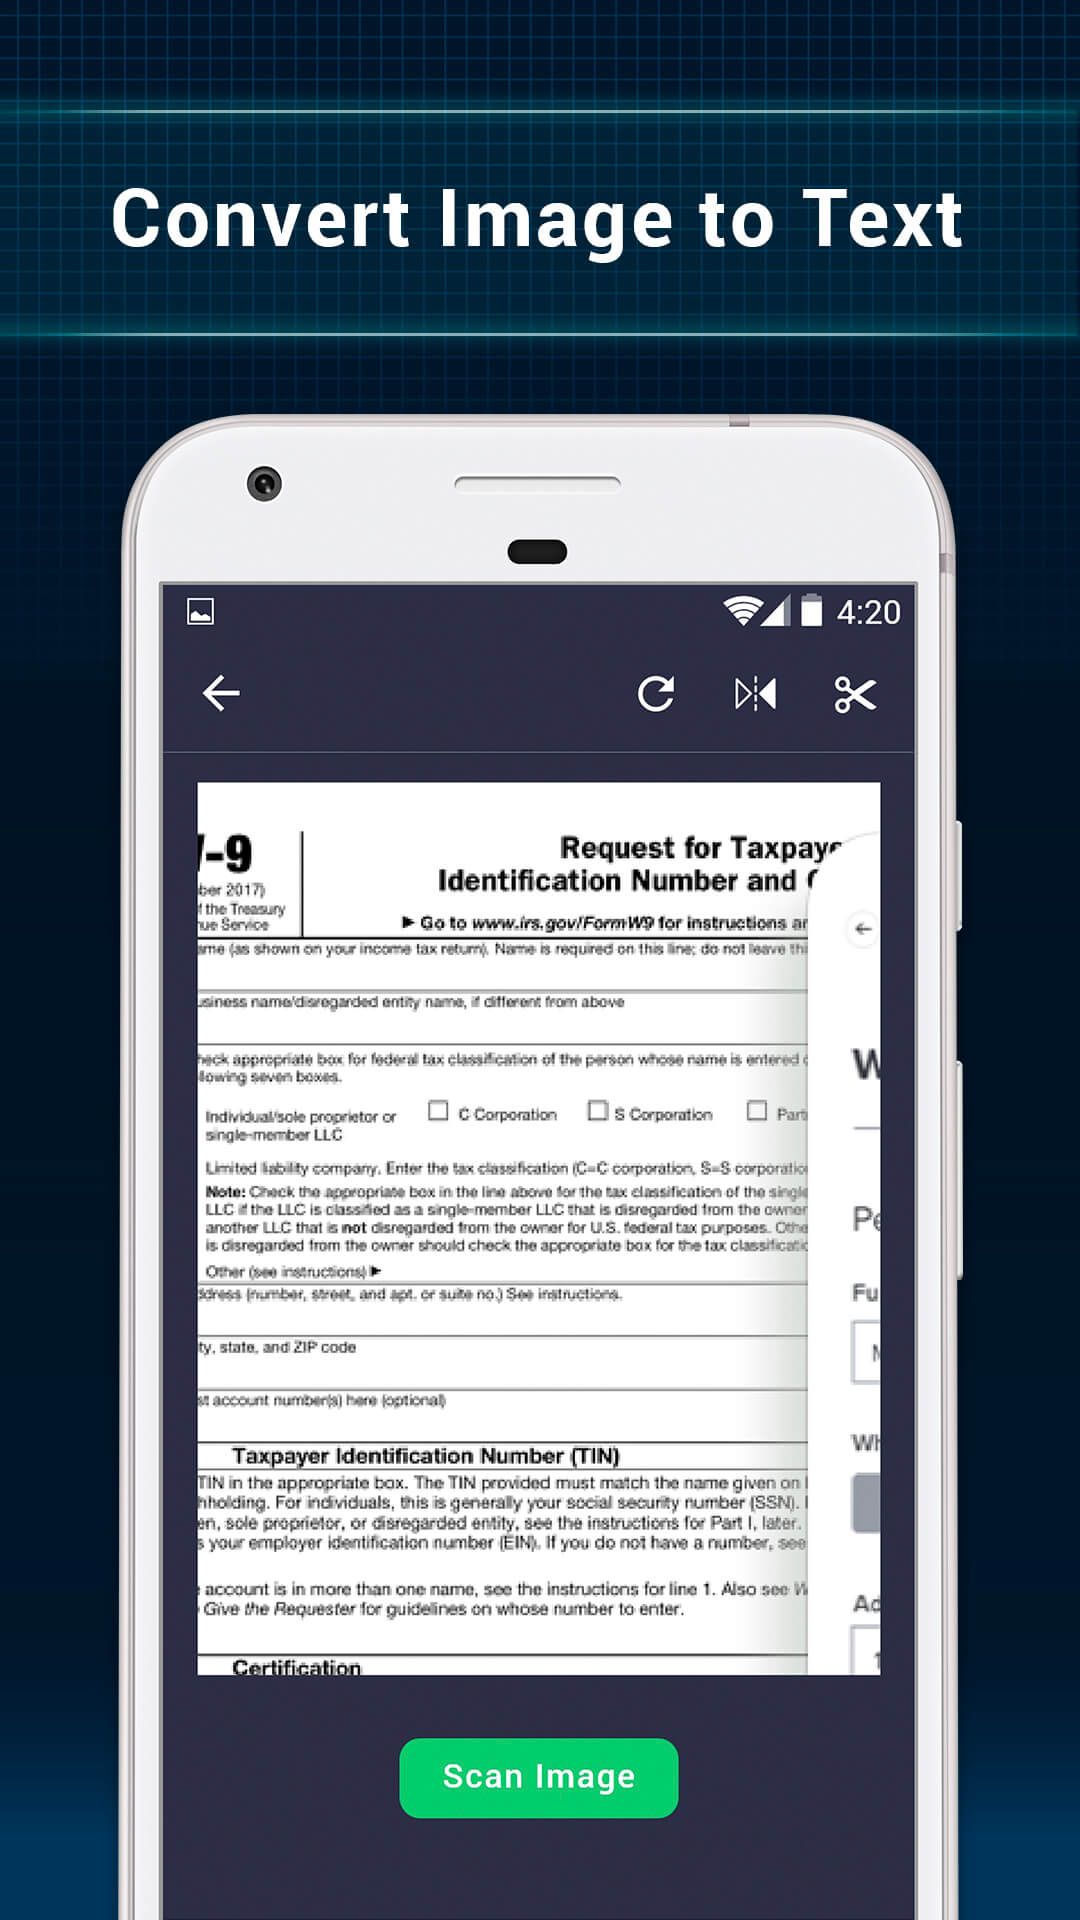 text-scanner-ocr-image-to-text-converter-android-by-hdpsolution